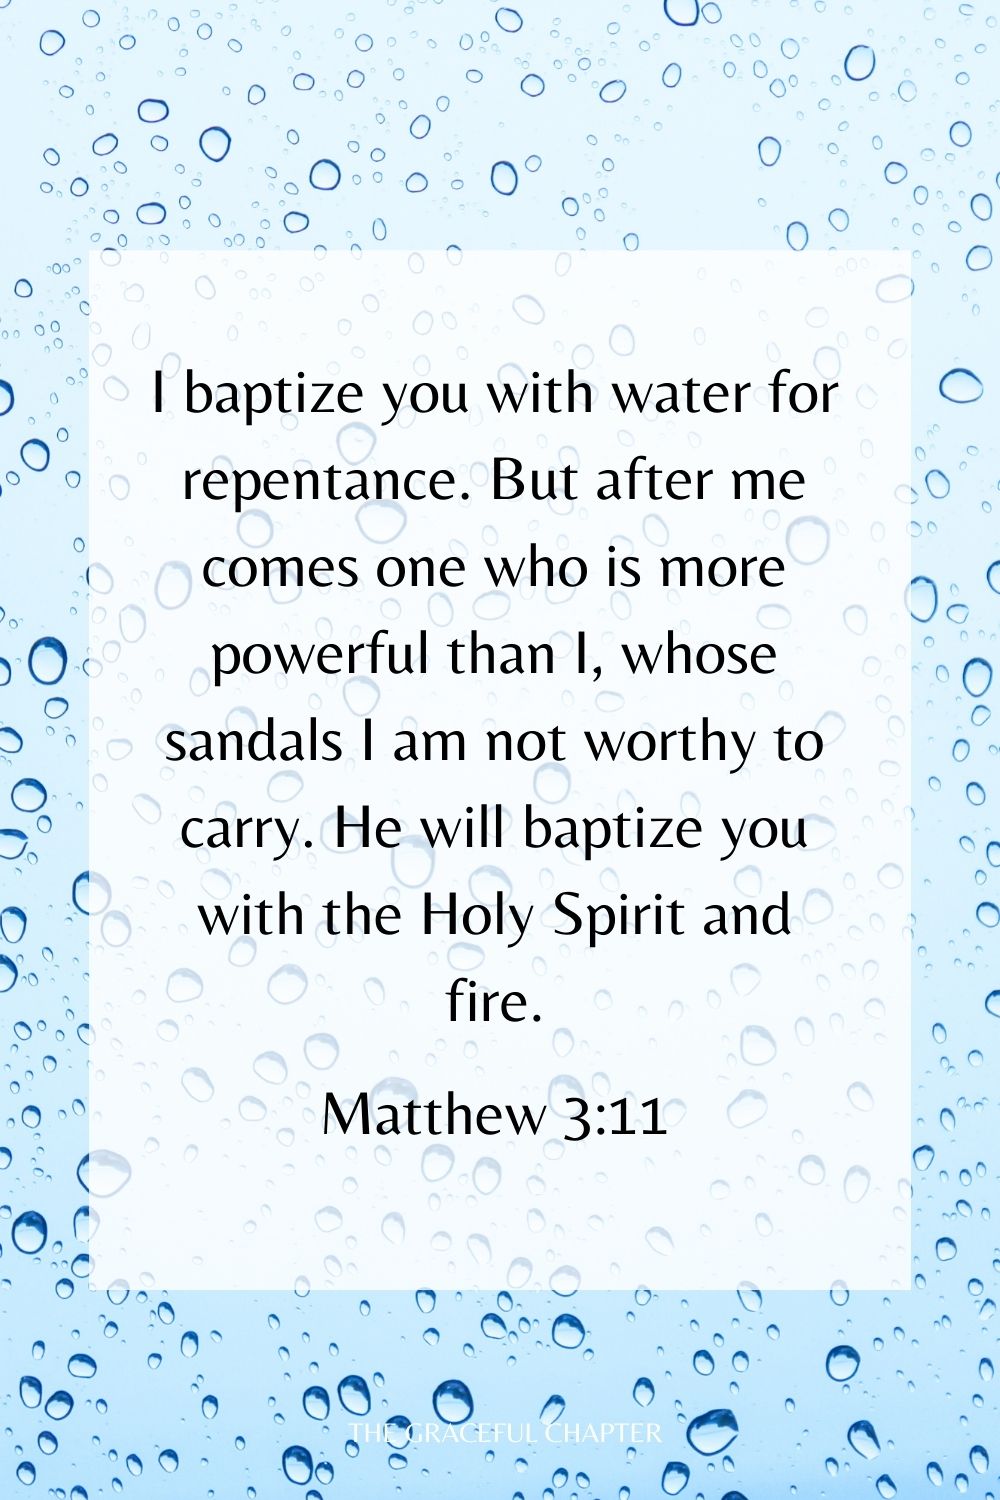 I baptize you with water for repentance. But after me comes one who is more powerful than I, whose sandals I am not worthy to carry. He will baptize you with the Holy Spirit and fire. Matthew 3:11